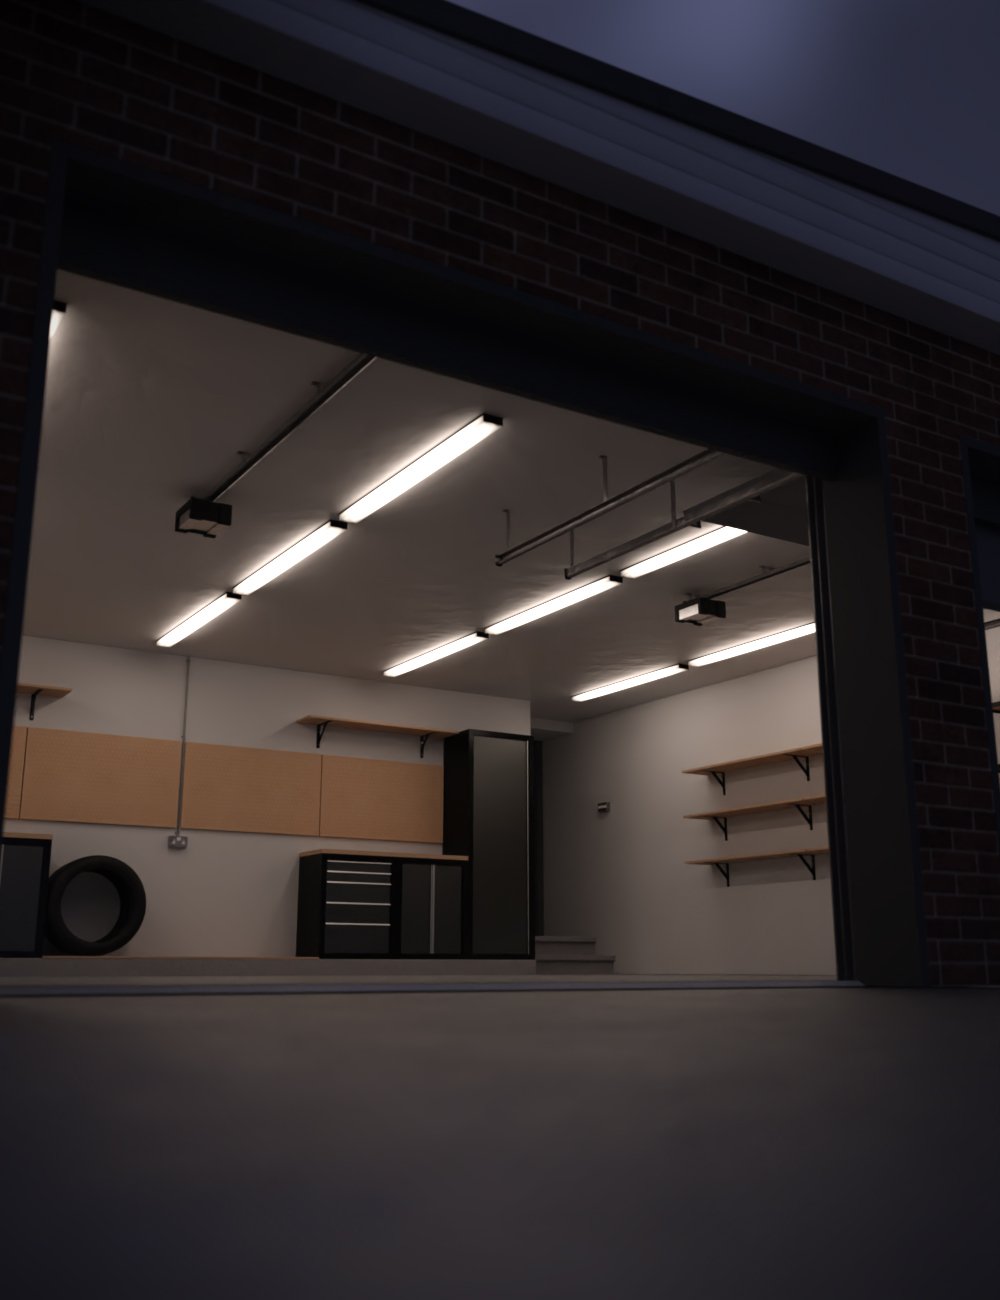 The Modern Home Garage by: Censored, 3D Models by Daz 3D